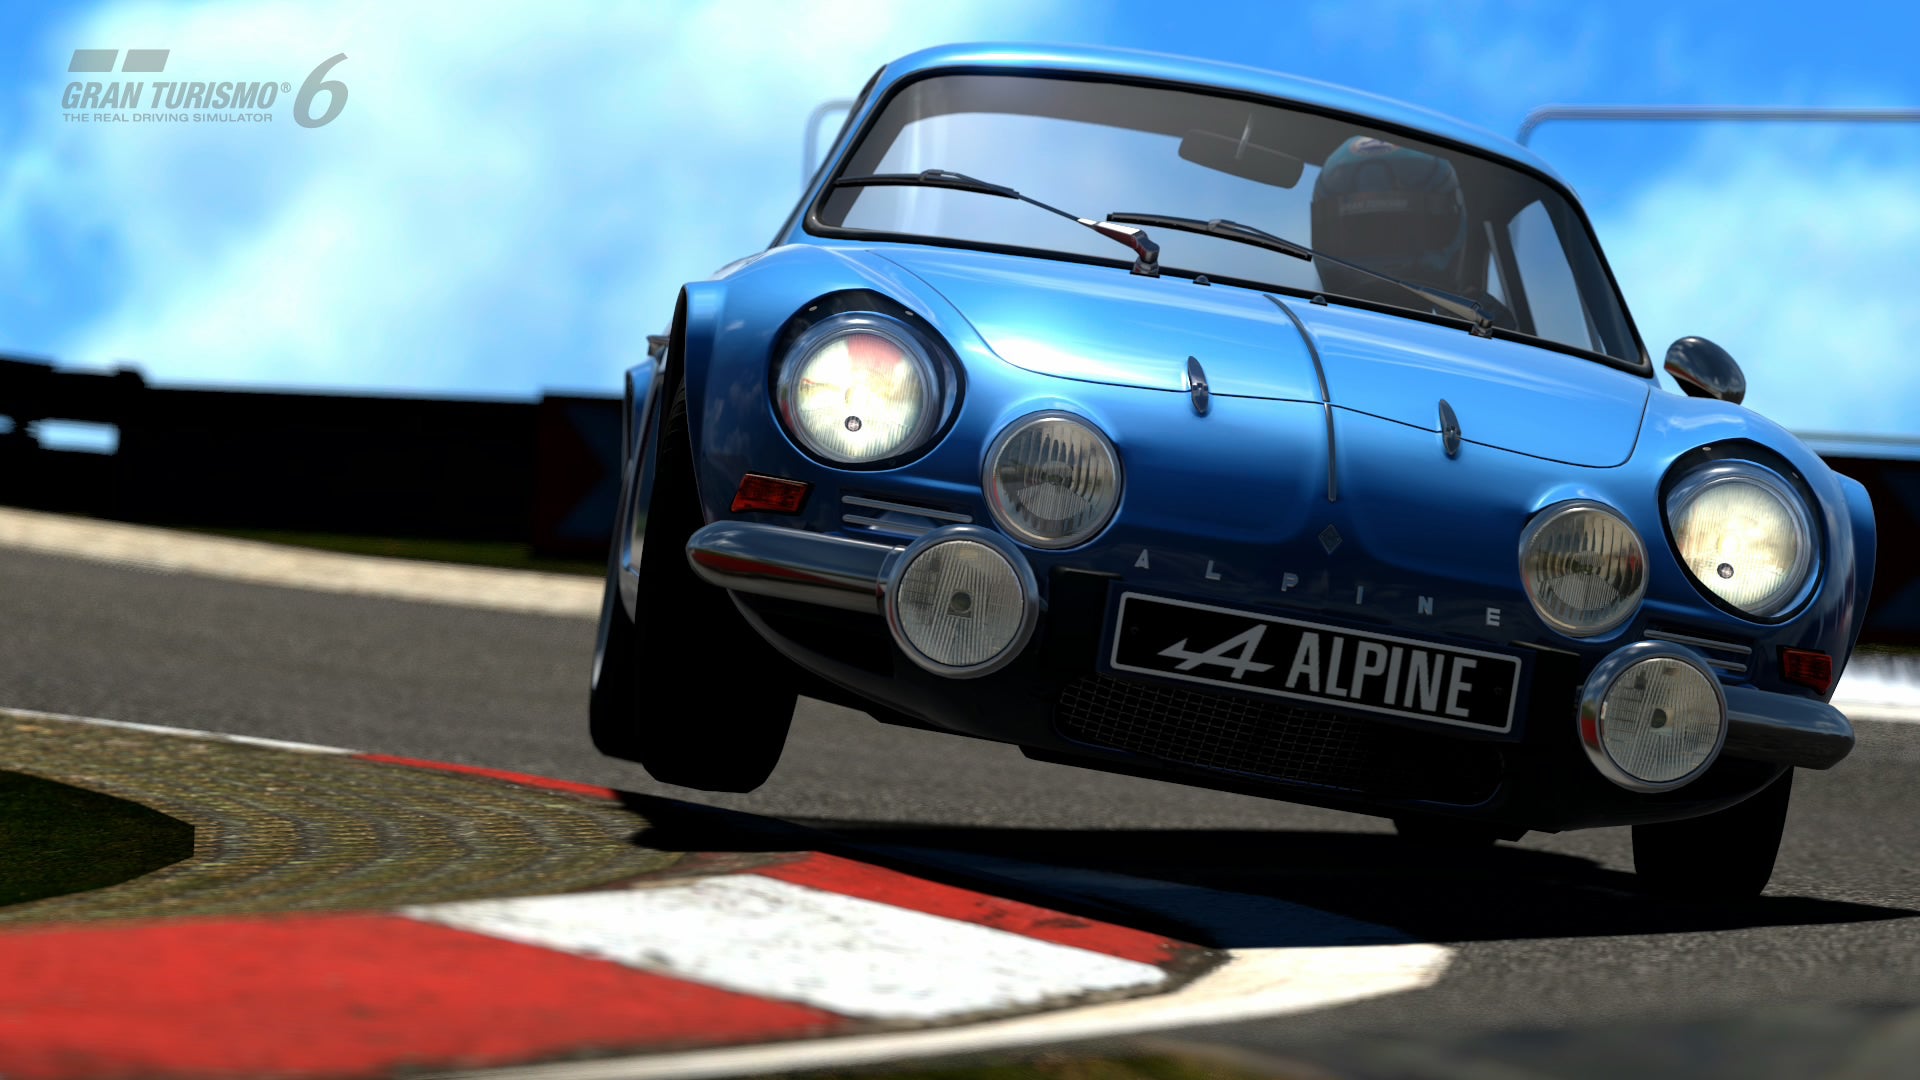 Image for Shooting Cars: The Art of Gran Turismo 6 Photography